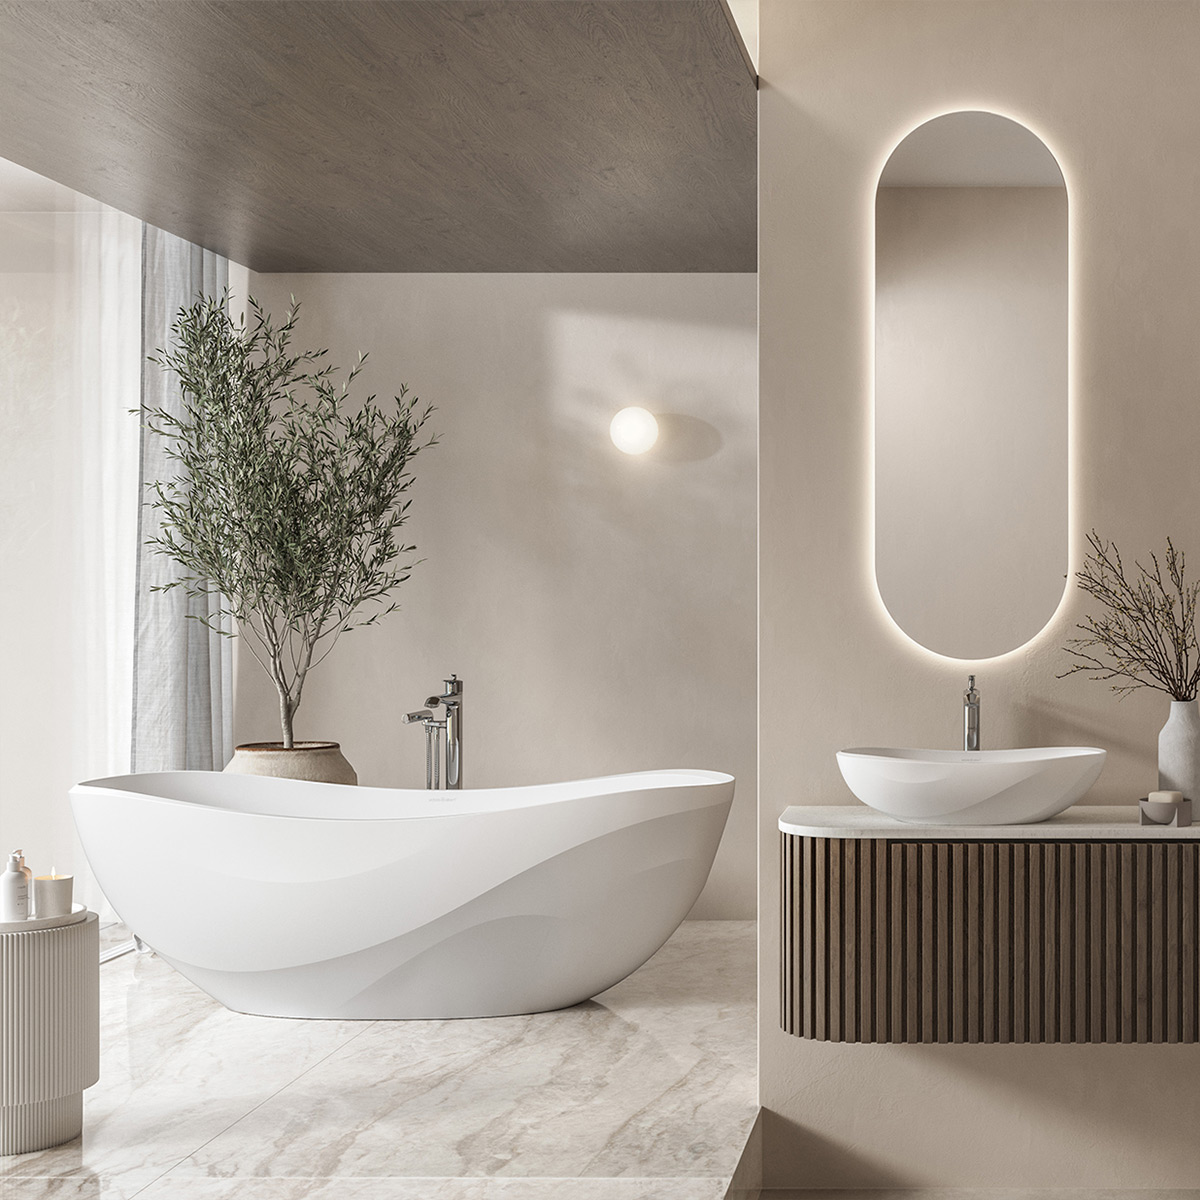 Victoria + Albert Seros 1650 Bath, sculpted wave design stone bath inspired by Sophie Elizabeth Thompson sculptures. Available in Gloss White and Matt White in bath, vessel basin and pedestal basin formats. Distributed in Australia by Luxe by Design, Brisbane.